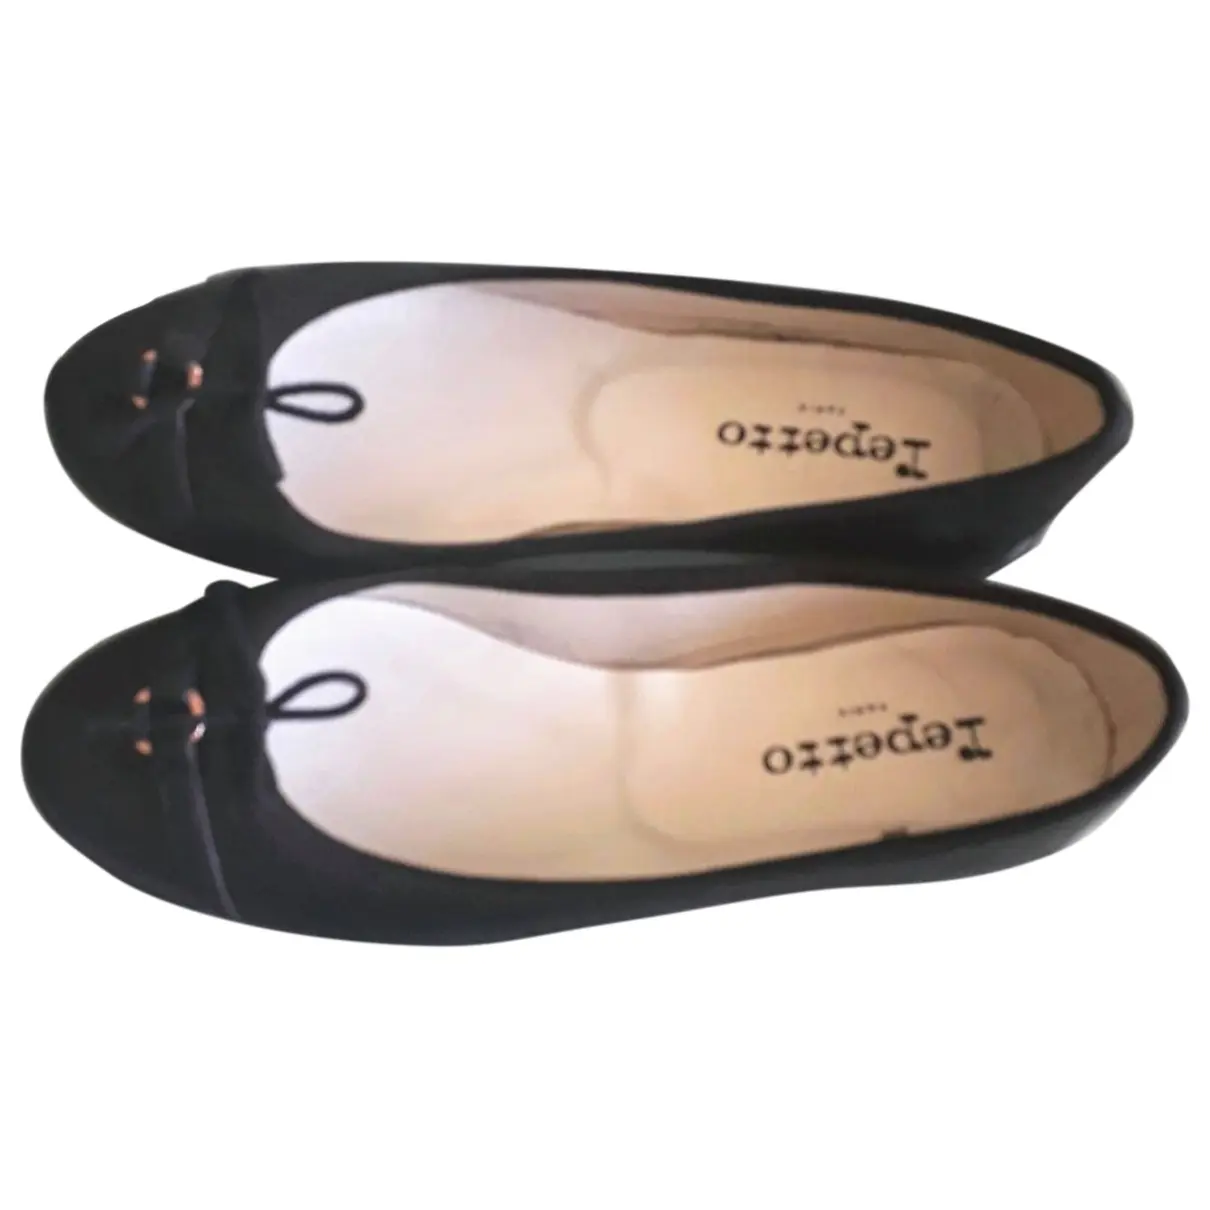 Leather ballet flats Repetto